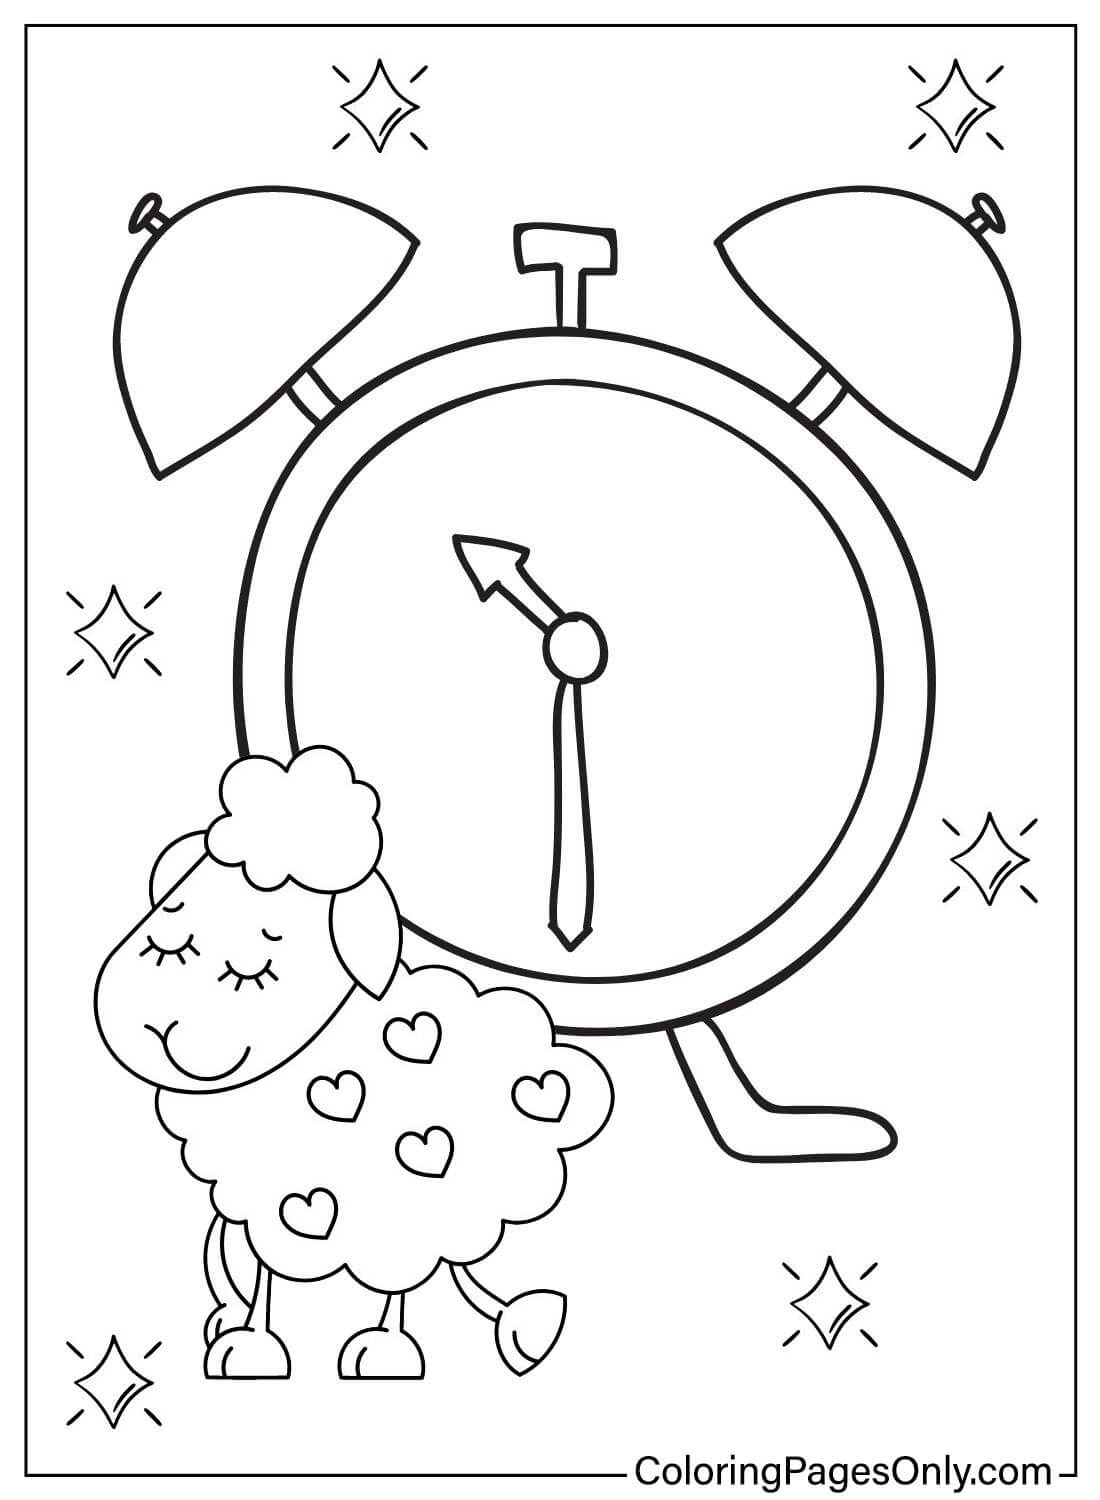 Printable Coloring Page Alarm Clock from Alarm Clock